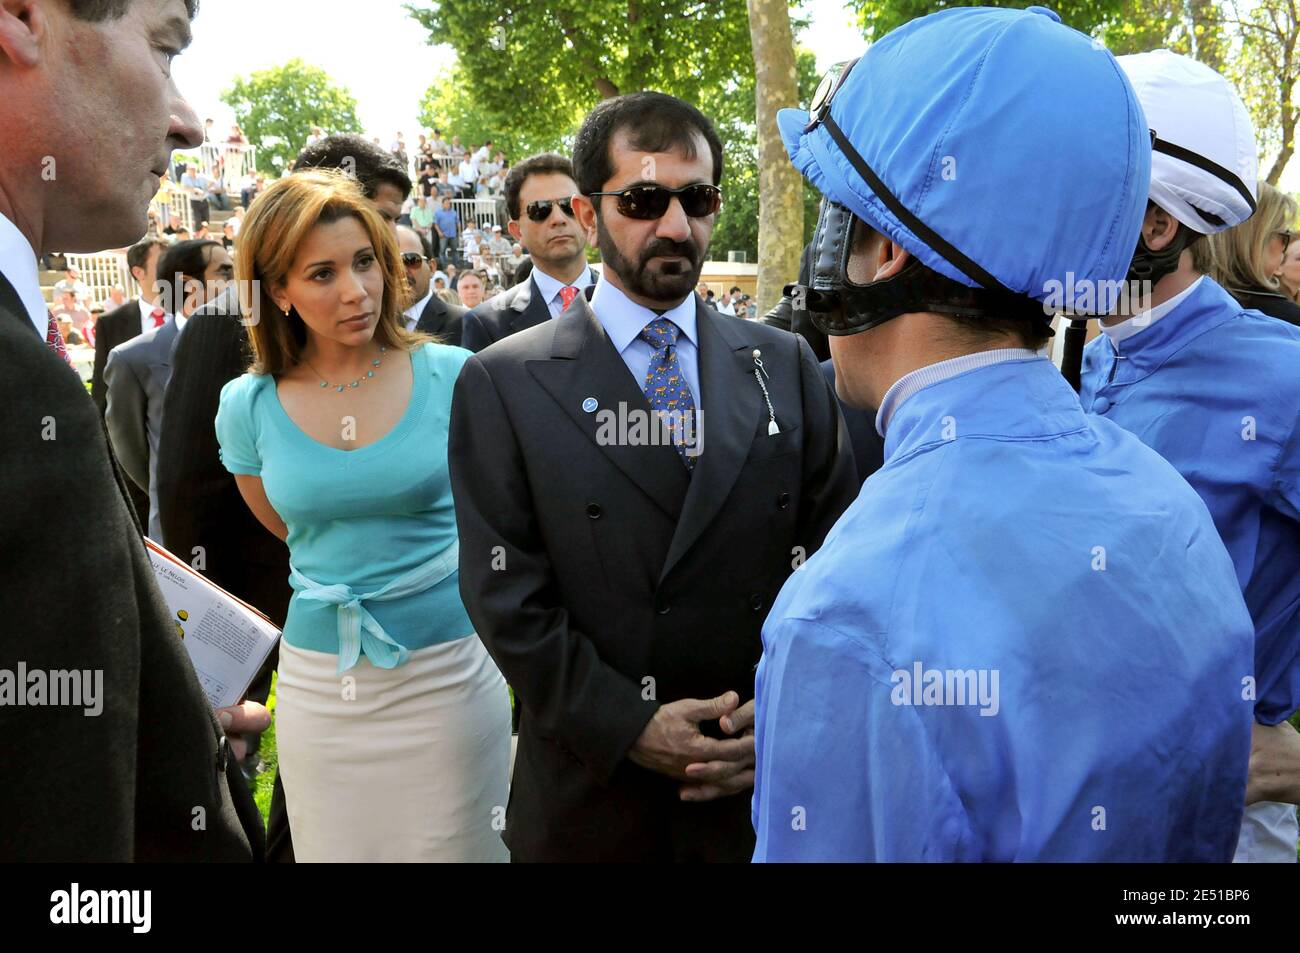 Jordan's Princess Haya and her husband, Dubai's ruler, Sheikh Mohammed Bin Rashed Al Maktoum talk with Italian jockey Lanfranco 'Frankie' Dettori as they attend colts race, known as 'Poule d'Essai des Poulains' at Longchamp racecourse in Paris, France, on May 11, 2008. Photo by Ammar Abd Rabbo/ABACAPRESS.COM Stock Photo